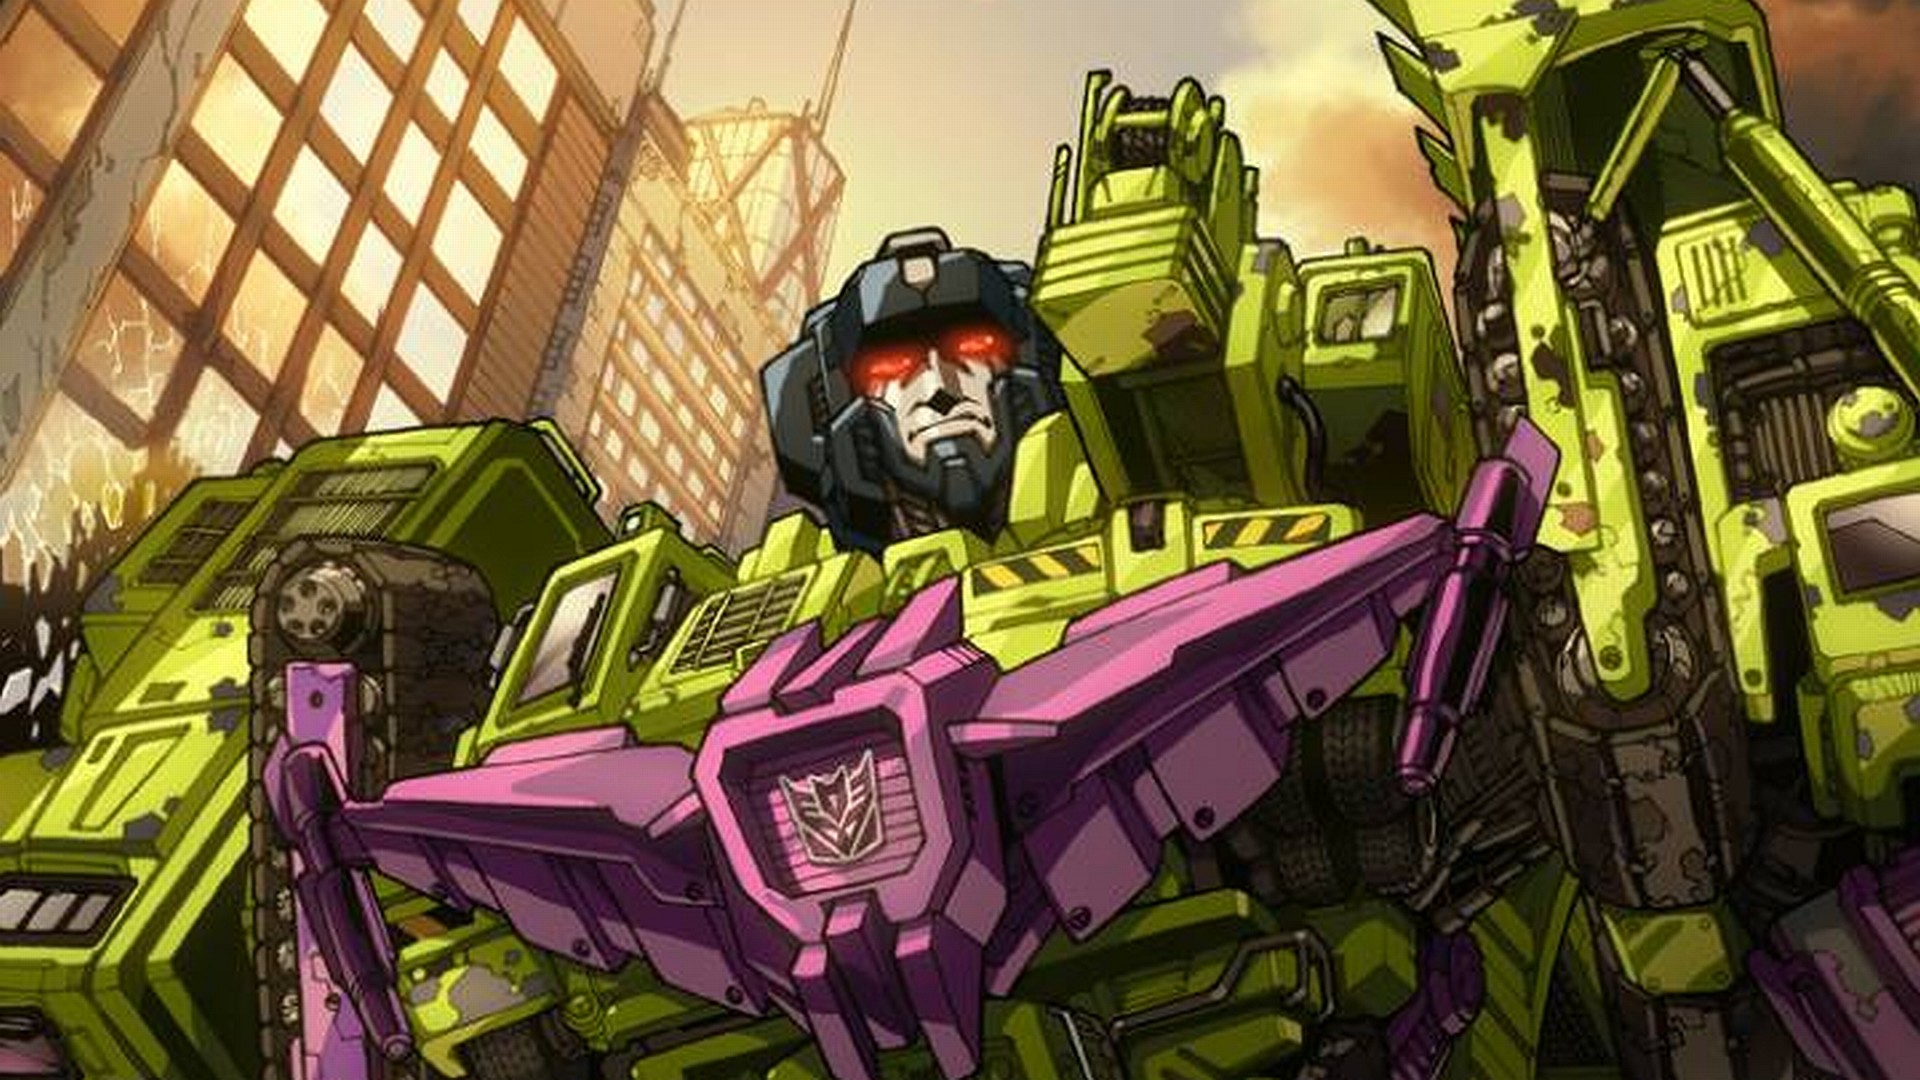 1920x1080 Transformers HD Wallpaper | Background Image |  | ID:161963 -  Wallpaper Abyss